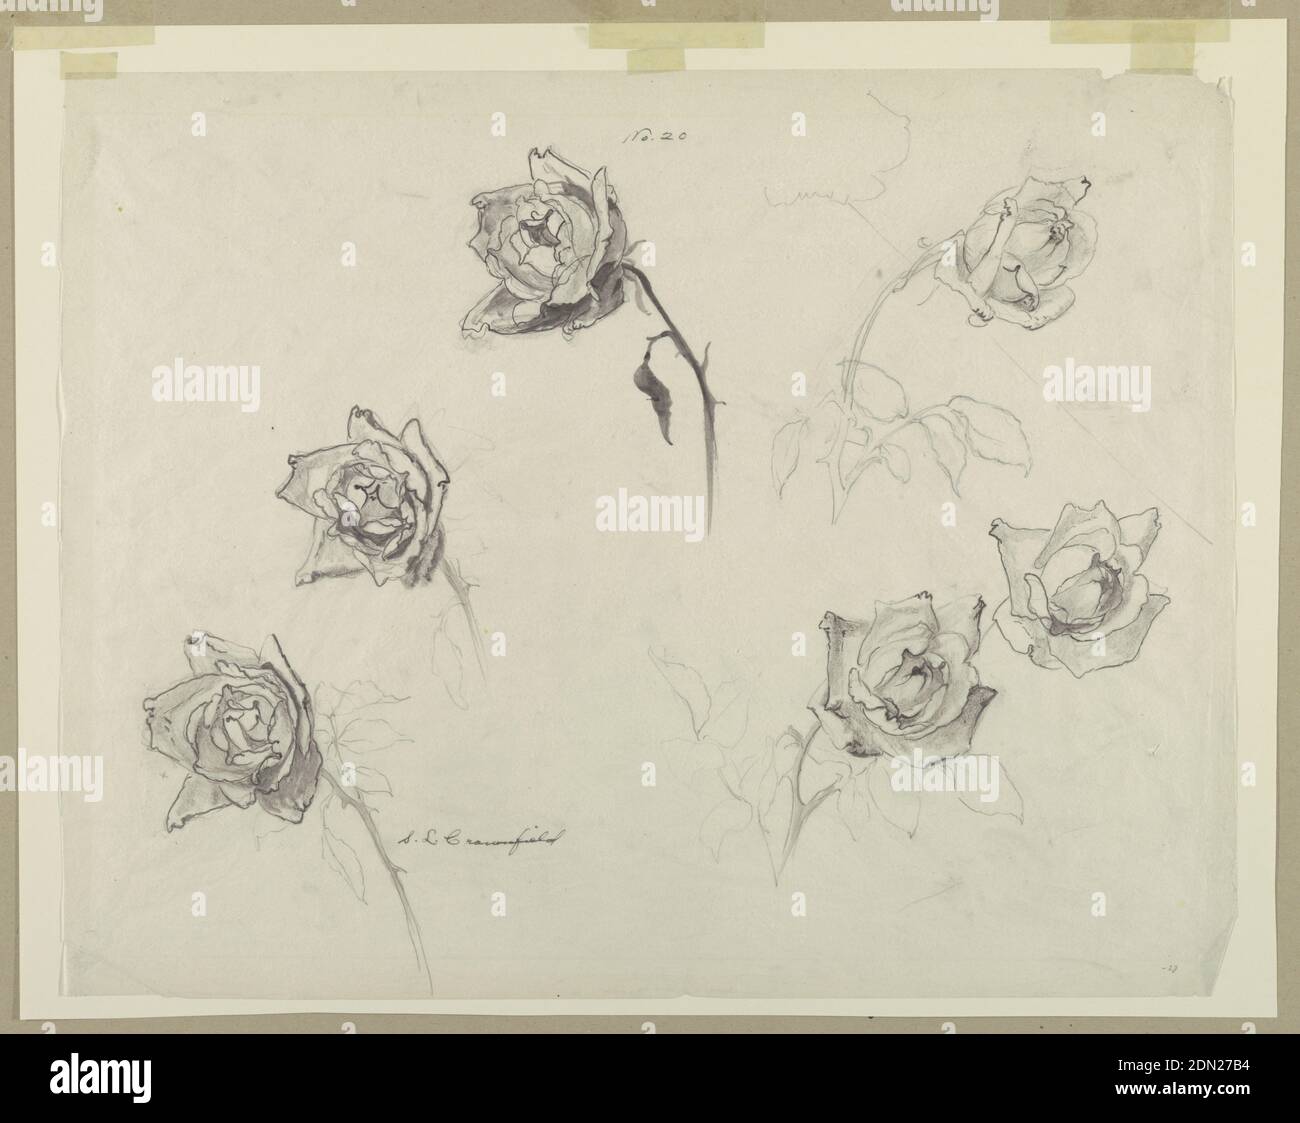 Study of Roses, Sophia L. Crownfield, (American, 1862–1929), Graphite, brush and ink, watercolor on tracing paper., Horizontal sheet with six studies of roses depicted from various angles., USA, early 20th century, nature studies, Drawing Stock Photo